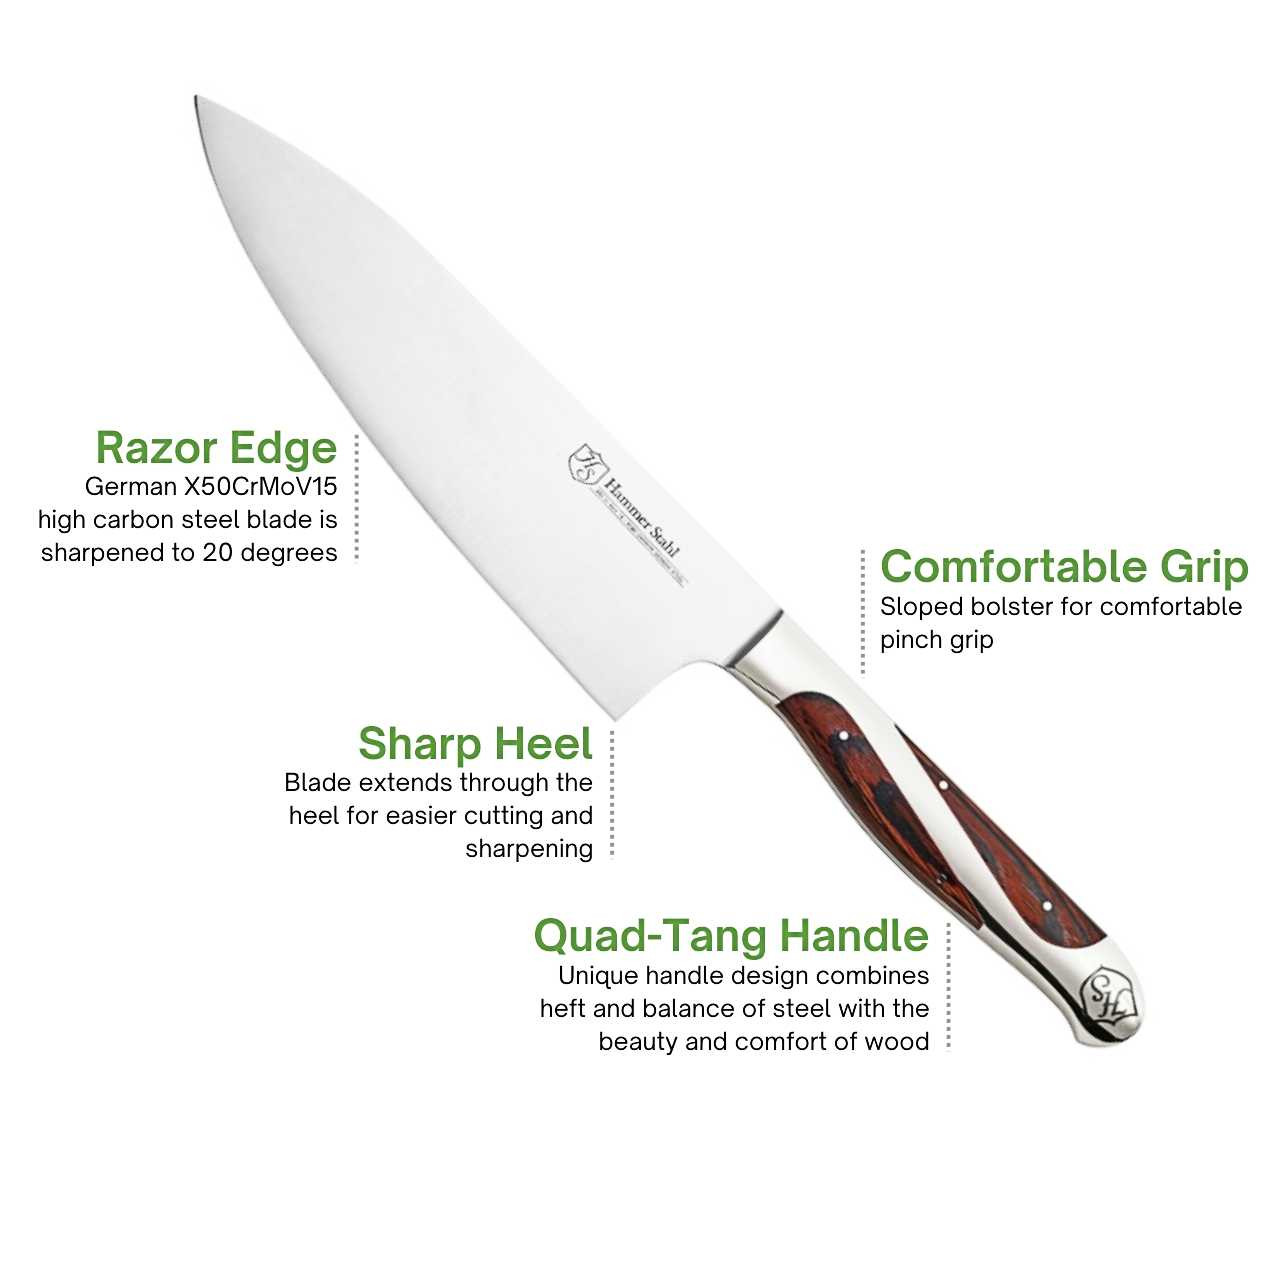 https://cdn11.bigcommerce.com/s-21kj3ntgv1/images/stencil/1280x1280/products/485/3130/Hammer-Stahl-6-inch-Chef-Knife-Features-Highlight__85585.1696097043.jpg?c=2